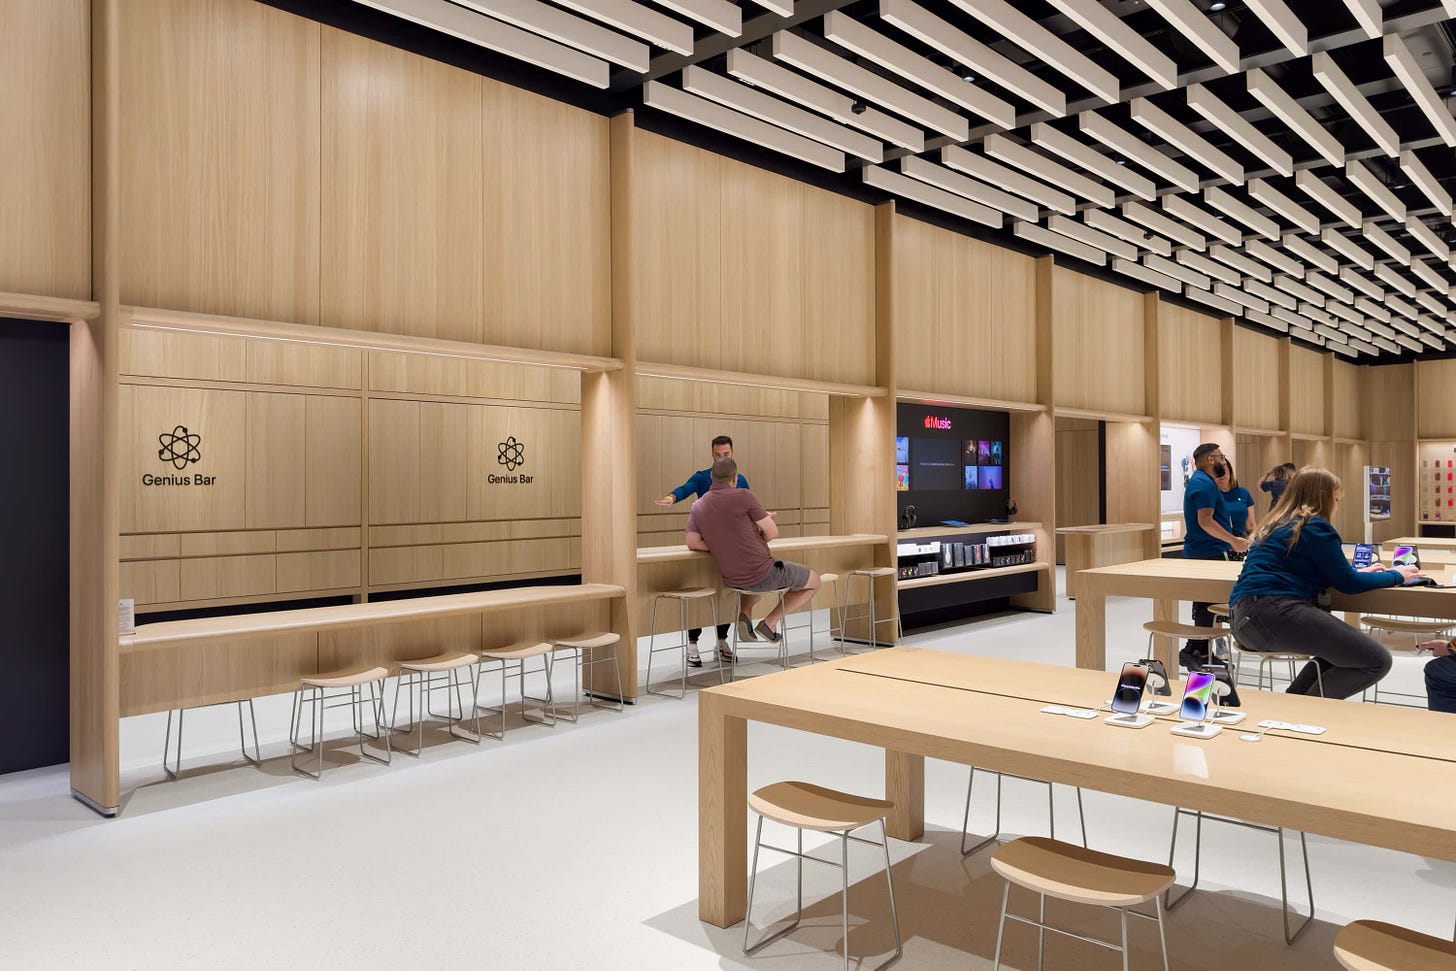 Customers sit at the Genius Bar and high table along the back wall of Apple Battersea.